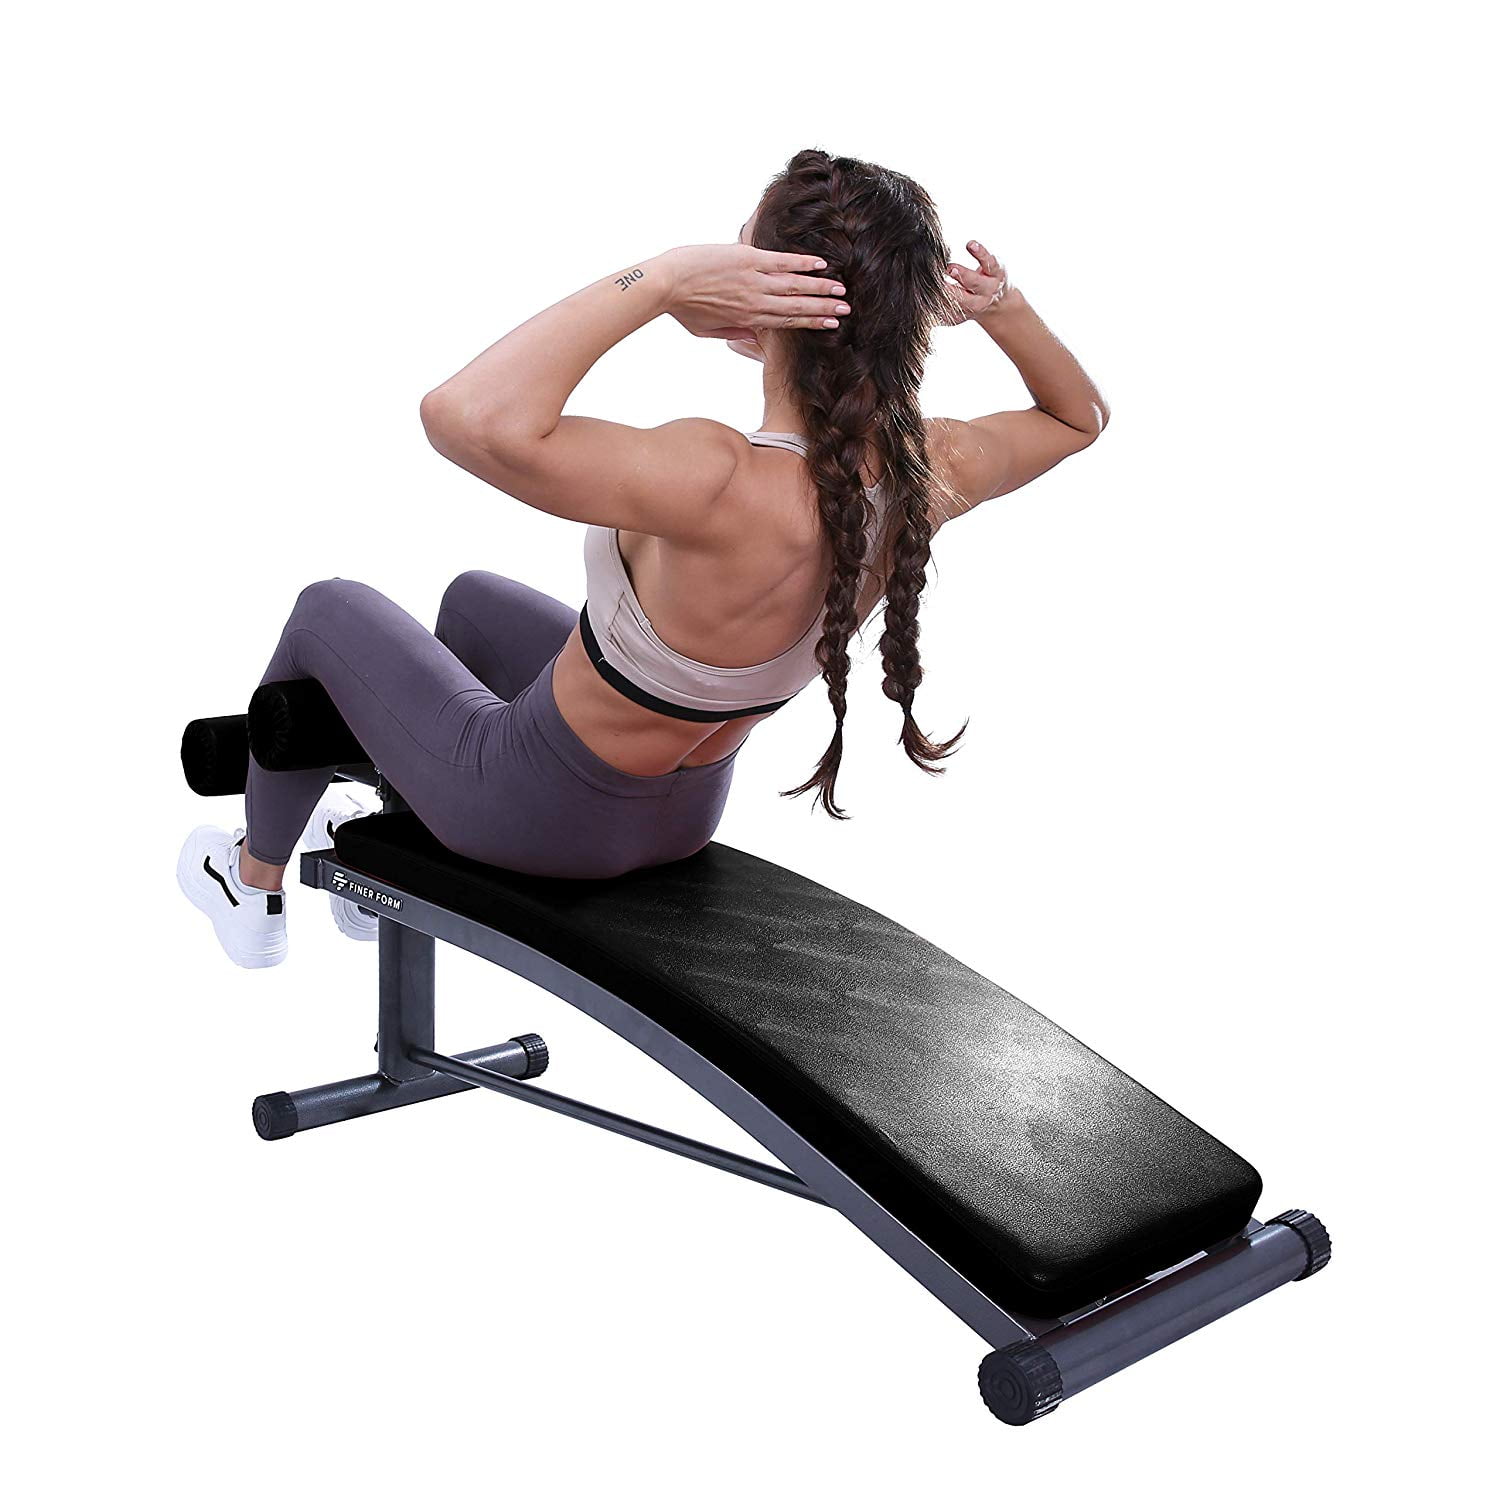 (Black) Ab Sit Up Exercises Form Handle Finer Crunch for with Gym-Quality Reverse Bench